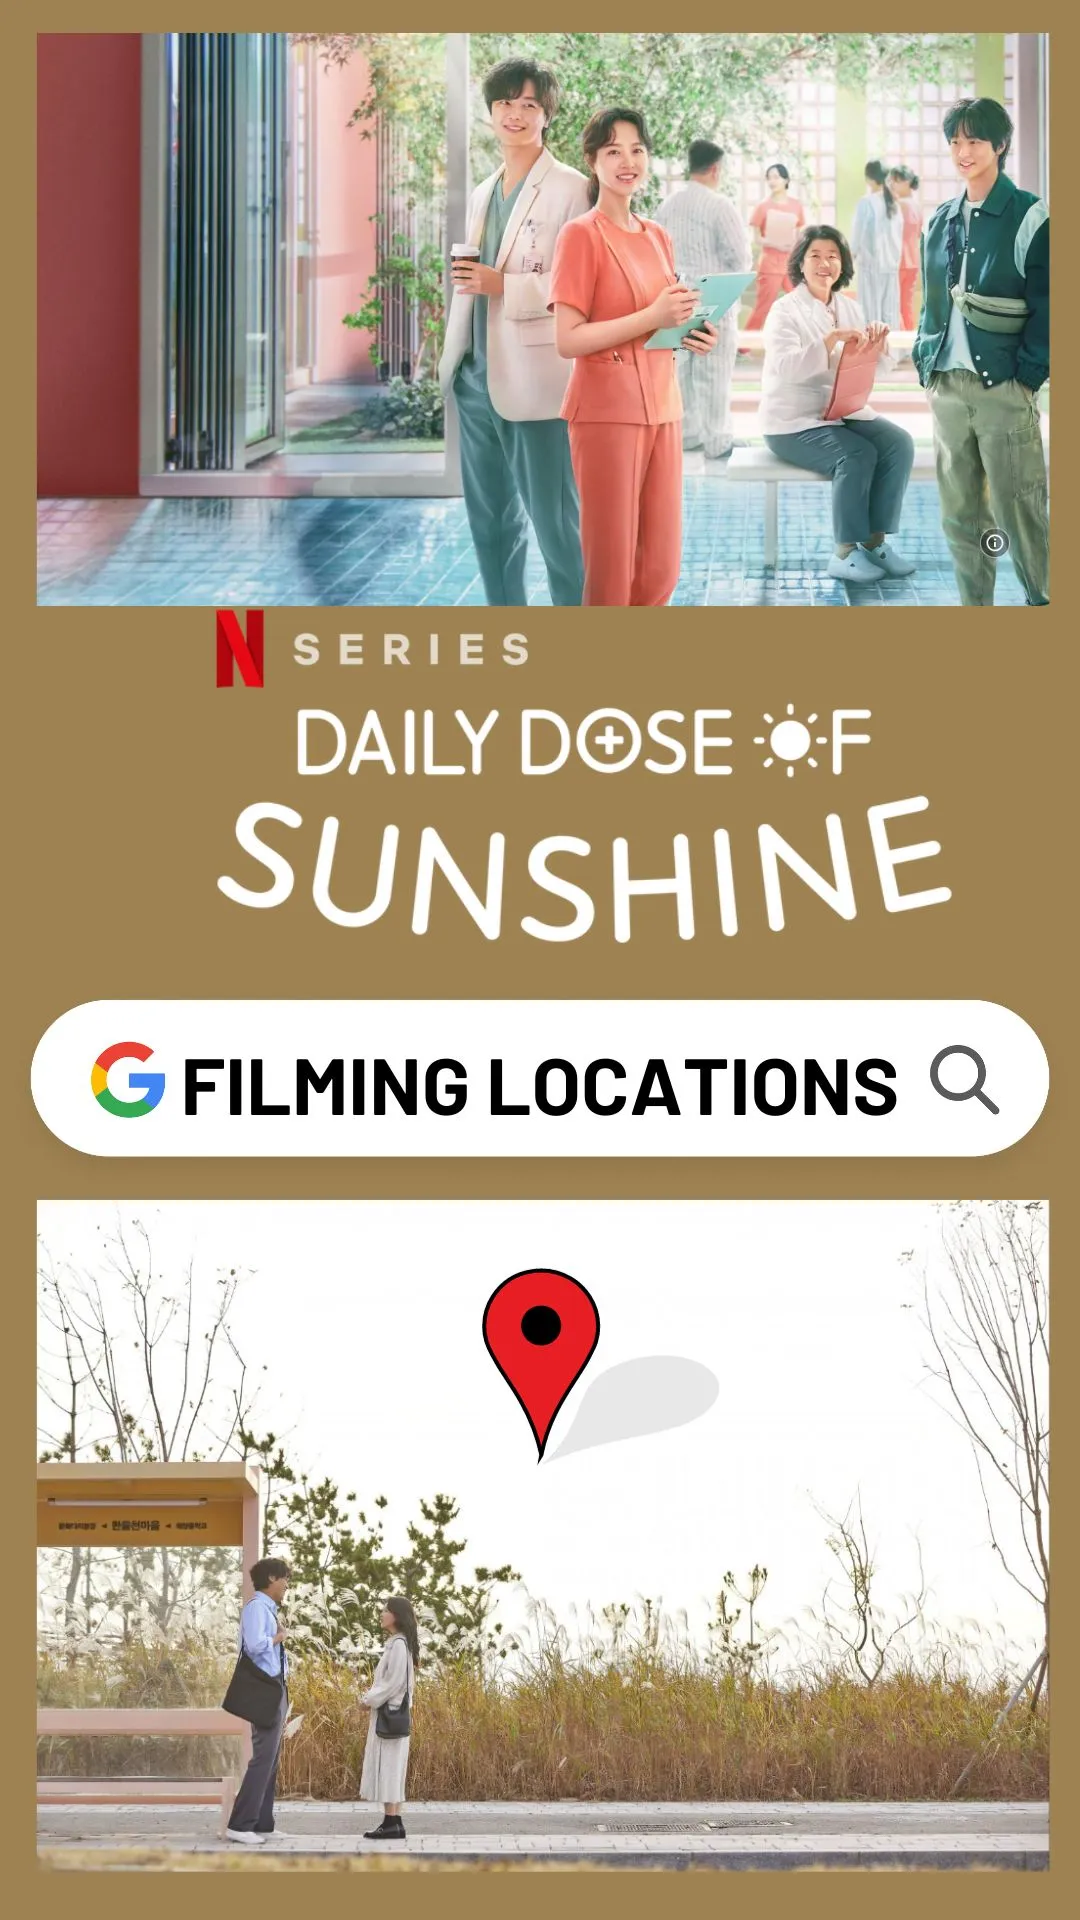 Daily Dose of Sunshine Filming Locations